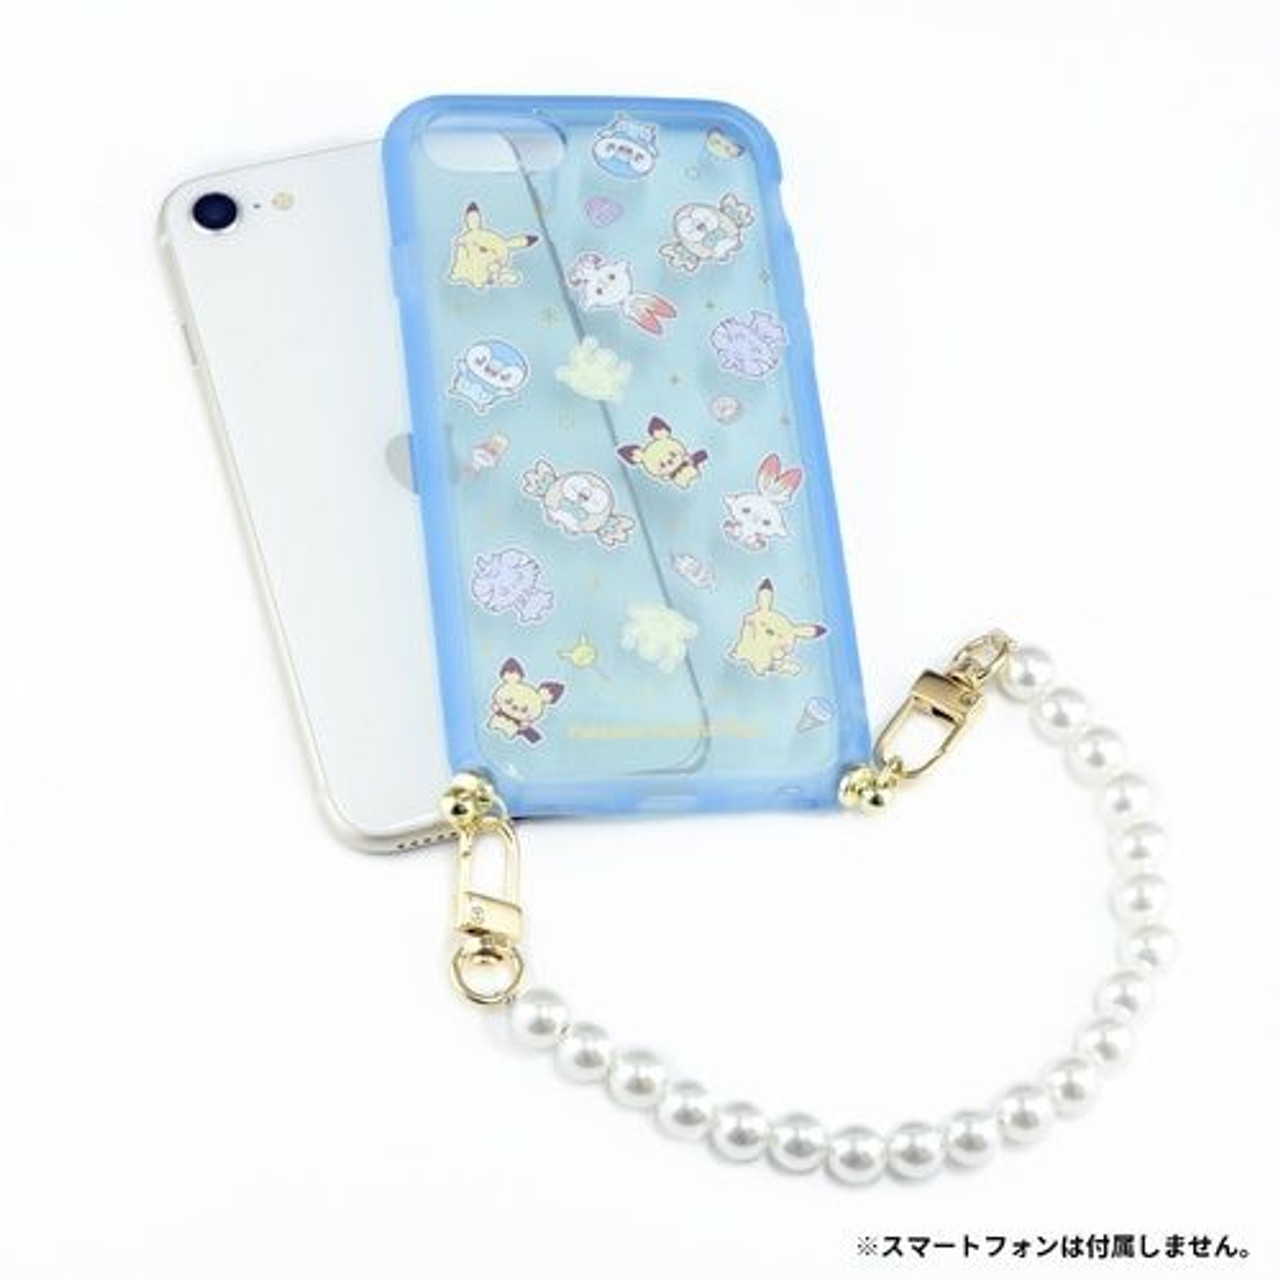 PokePeace IIIIfit (3rd/2nd Pearl iPhone Everybody Strap Case for with SE gen.)/8/7/6s/6 